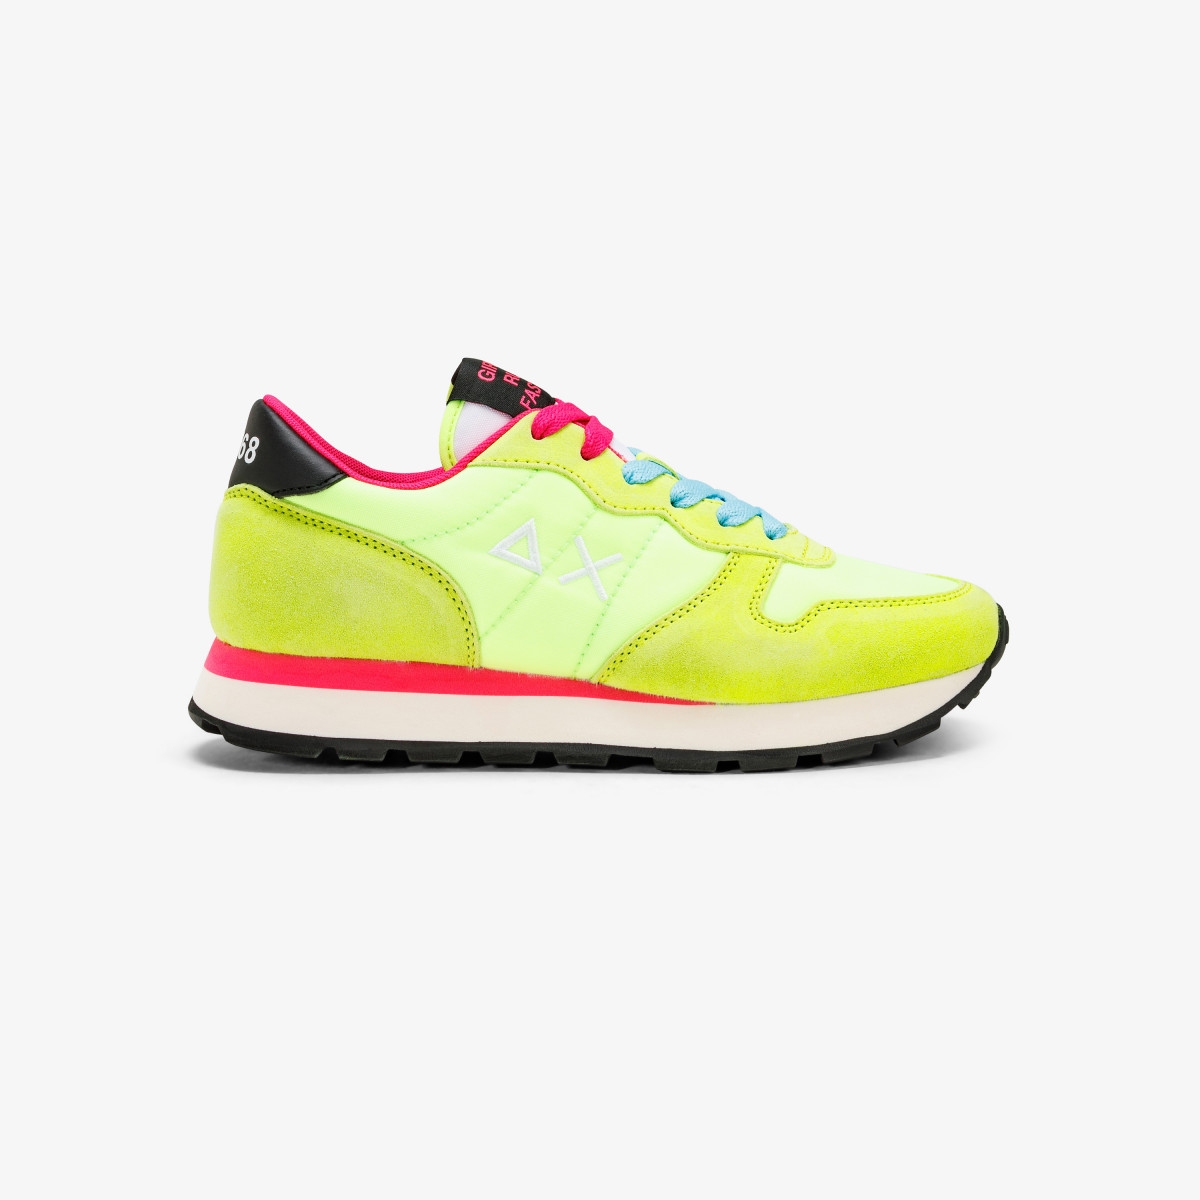 ALLY SOLID NYLON YELLOW FLUO